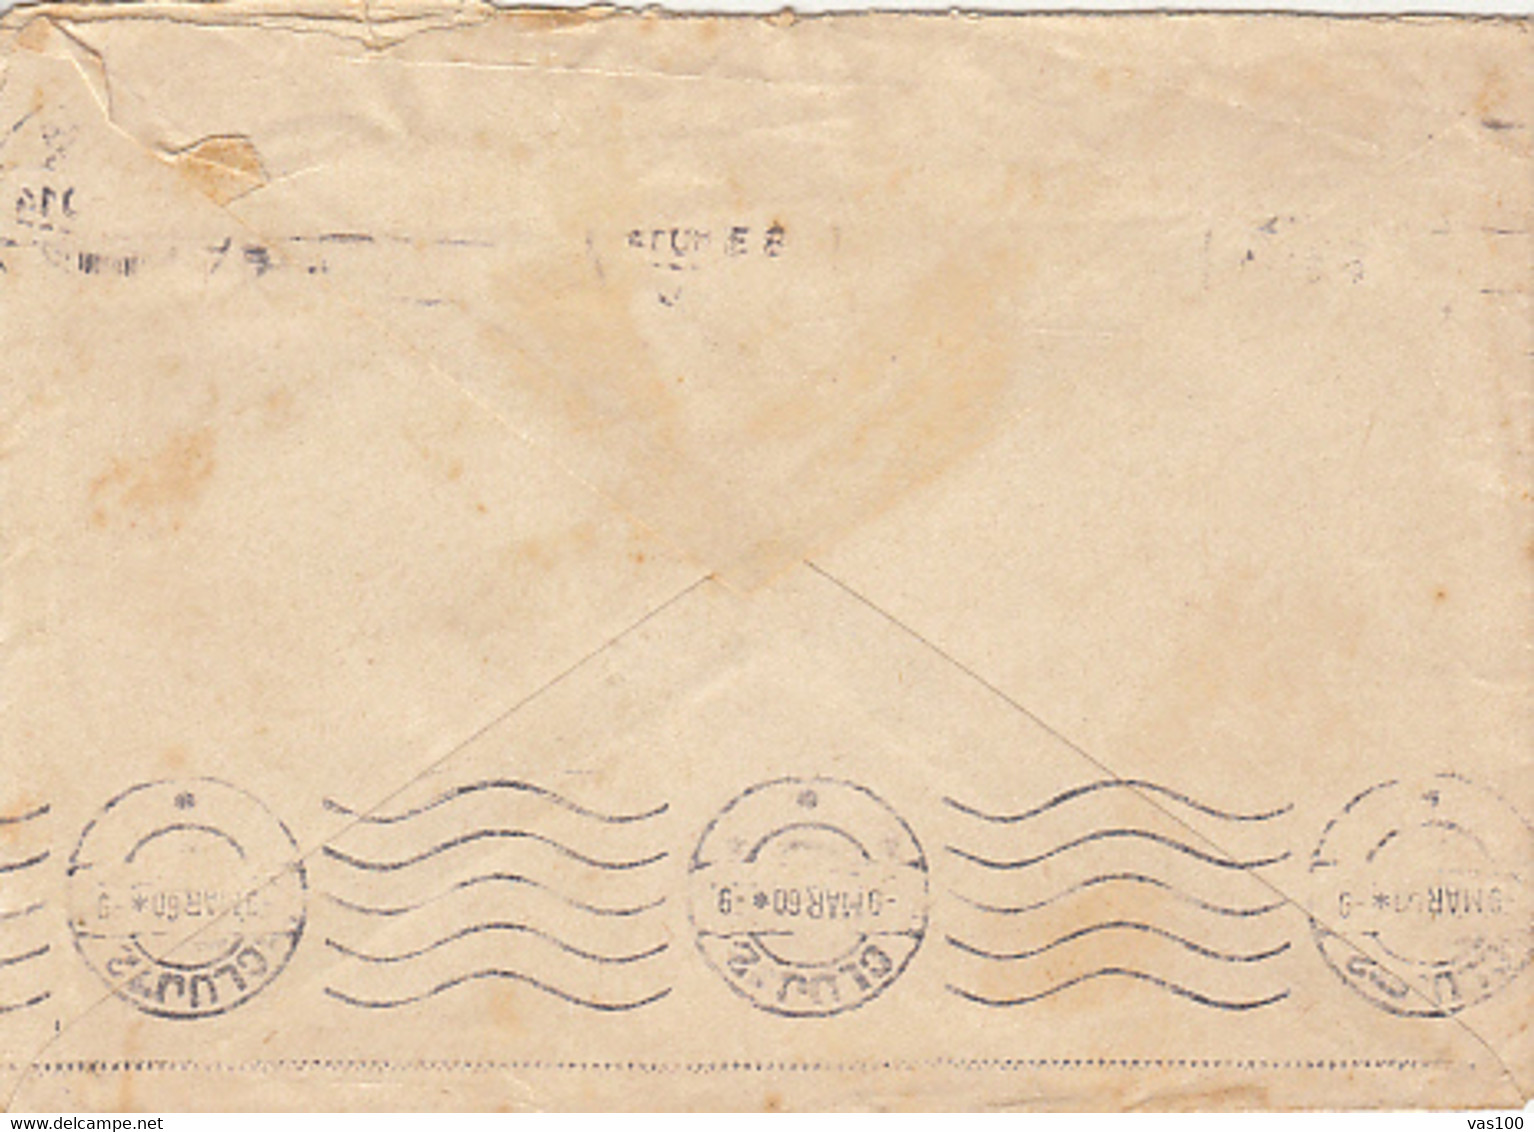 MINER, PRINTING STAMPS, WAVY LINES CANCELLATIONS ON COVER, 1960, ROMANIA - Covers & Documents